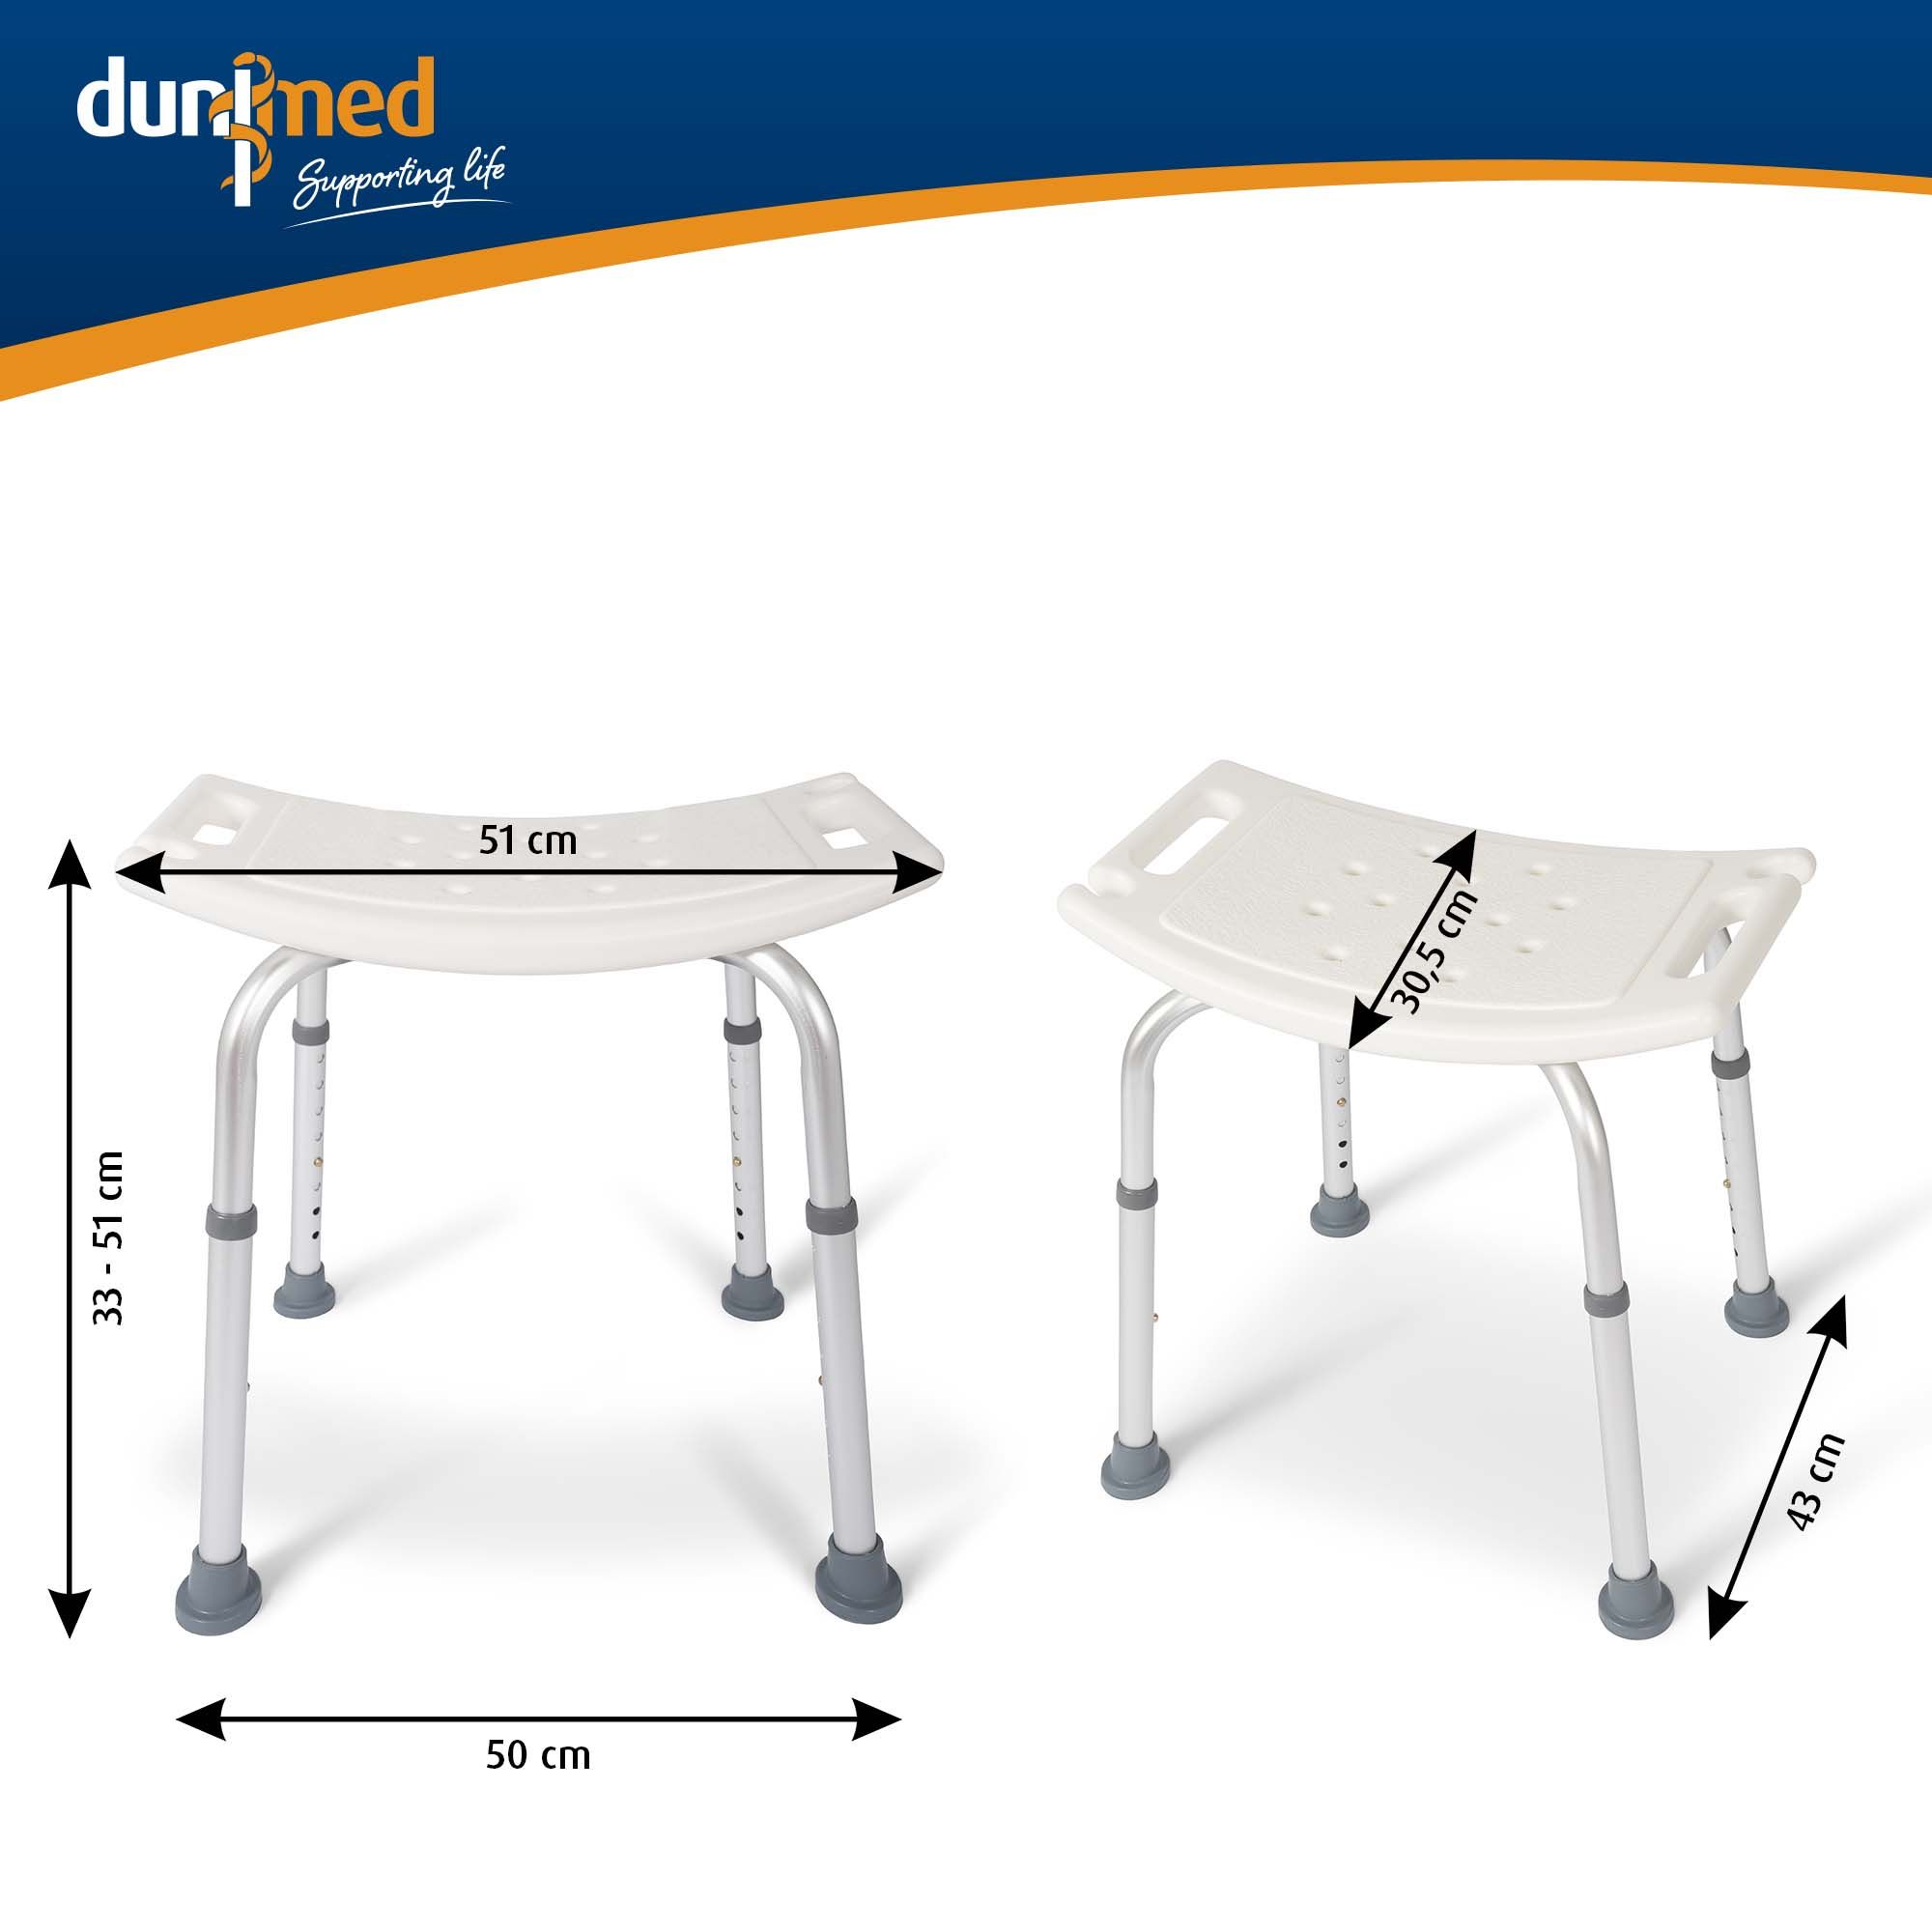 dunimed shower chair in height adjustable size chart